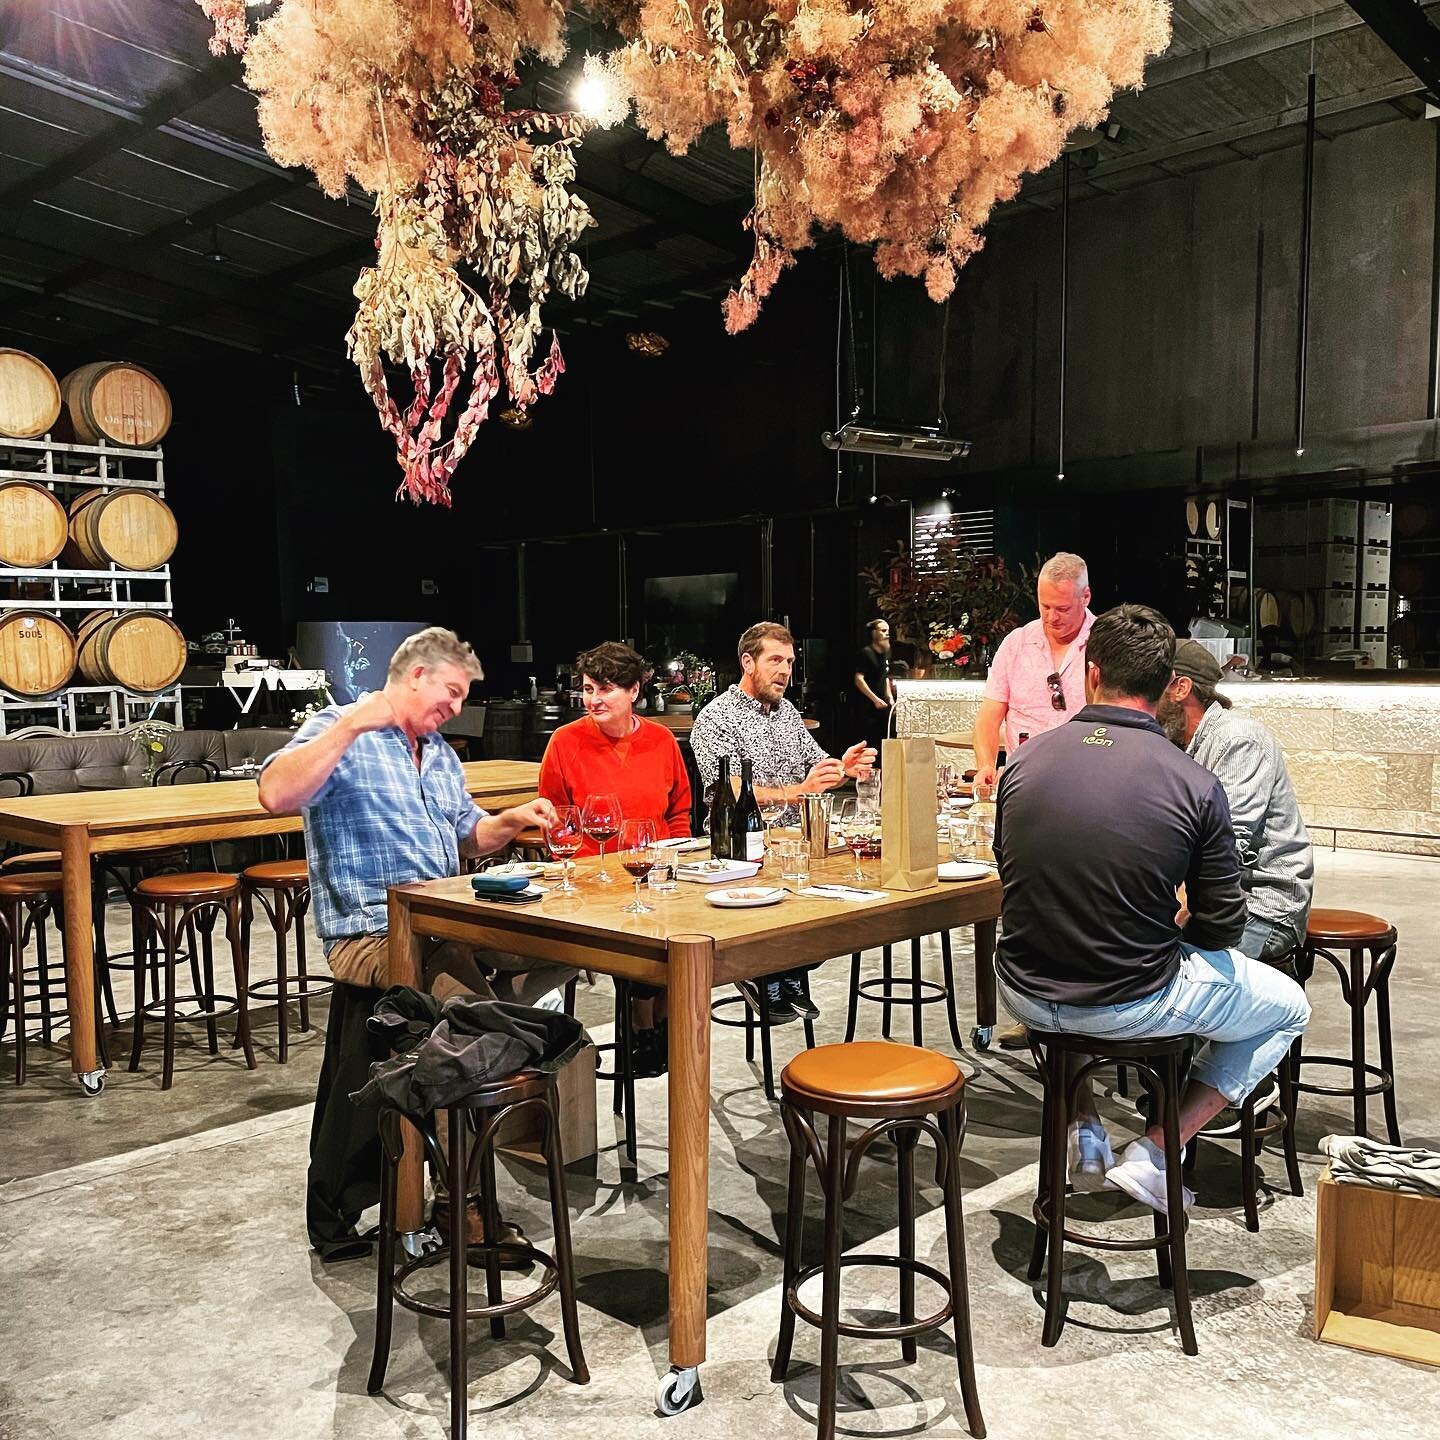 As they say, there&rsquo;s no &ldquo;i&rdquo; in team&hellip;.A well earned afternoon off the tools yesterday for everyone to enjoy some great food and wine @jaydenong_wines and celebrate the end of another vintage.
*****
*****
*****
#thousandcandles